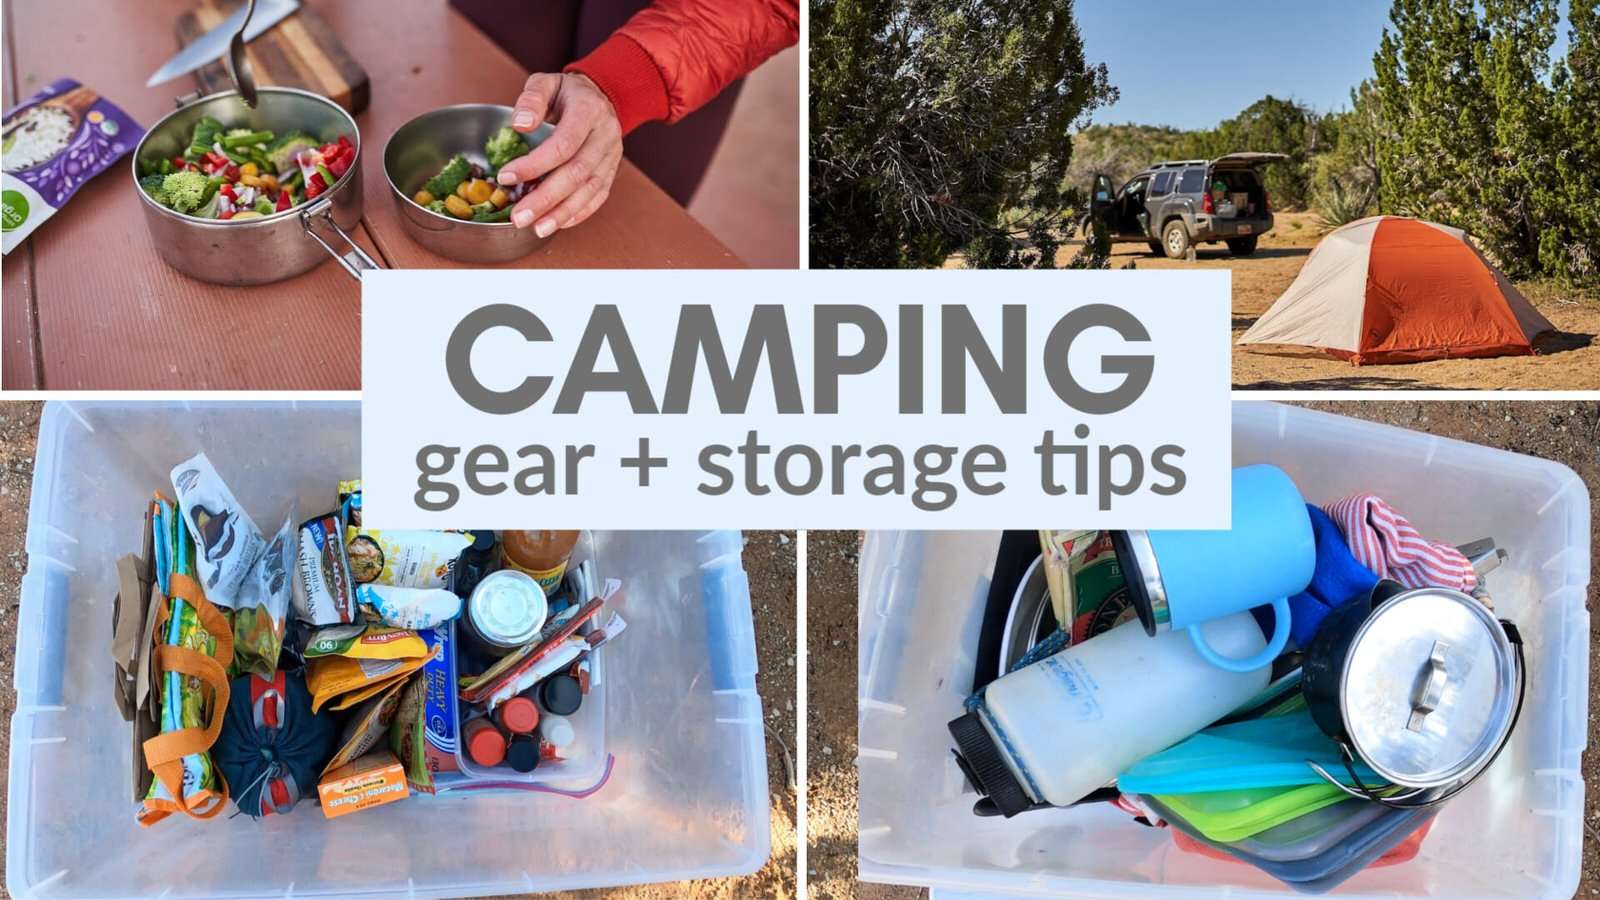 How to Keep Your Food Safe and Fresh While Camping?